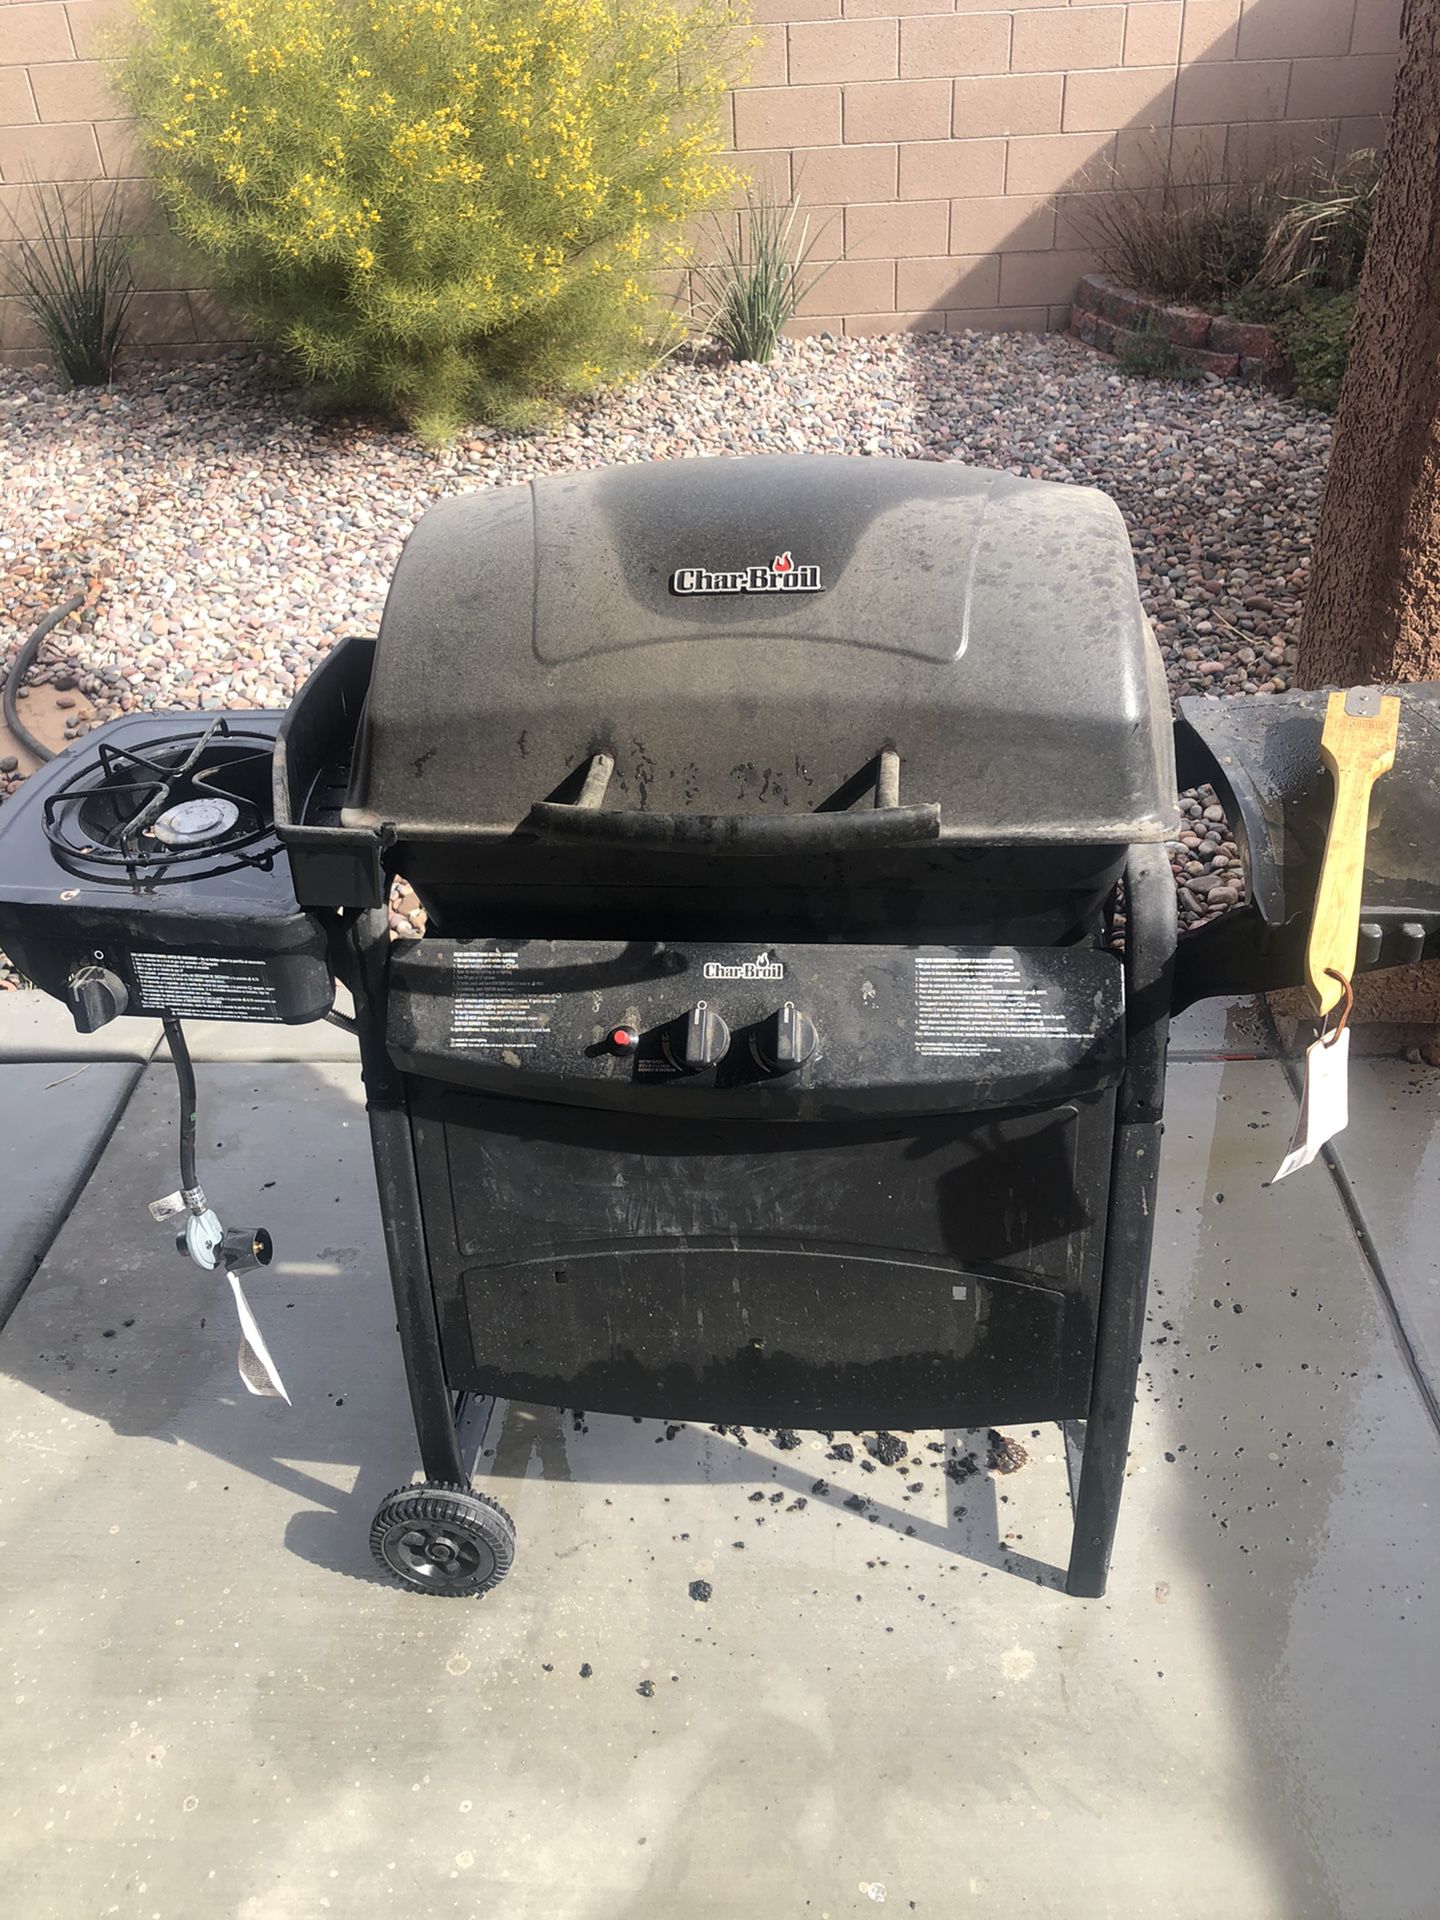 Charbroil BBQ grill with propane tank and tools